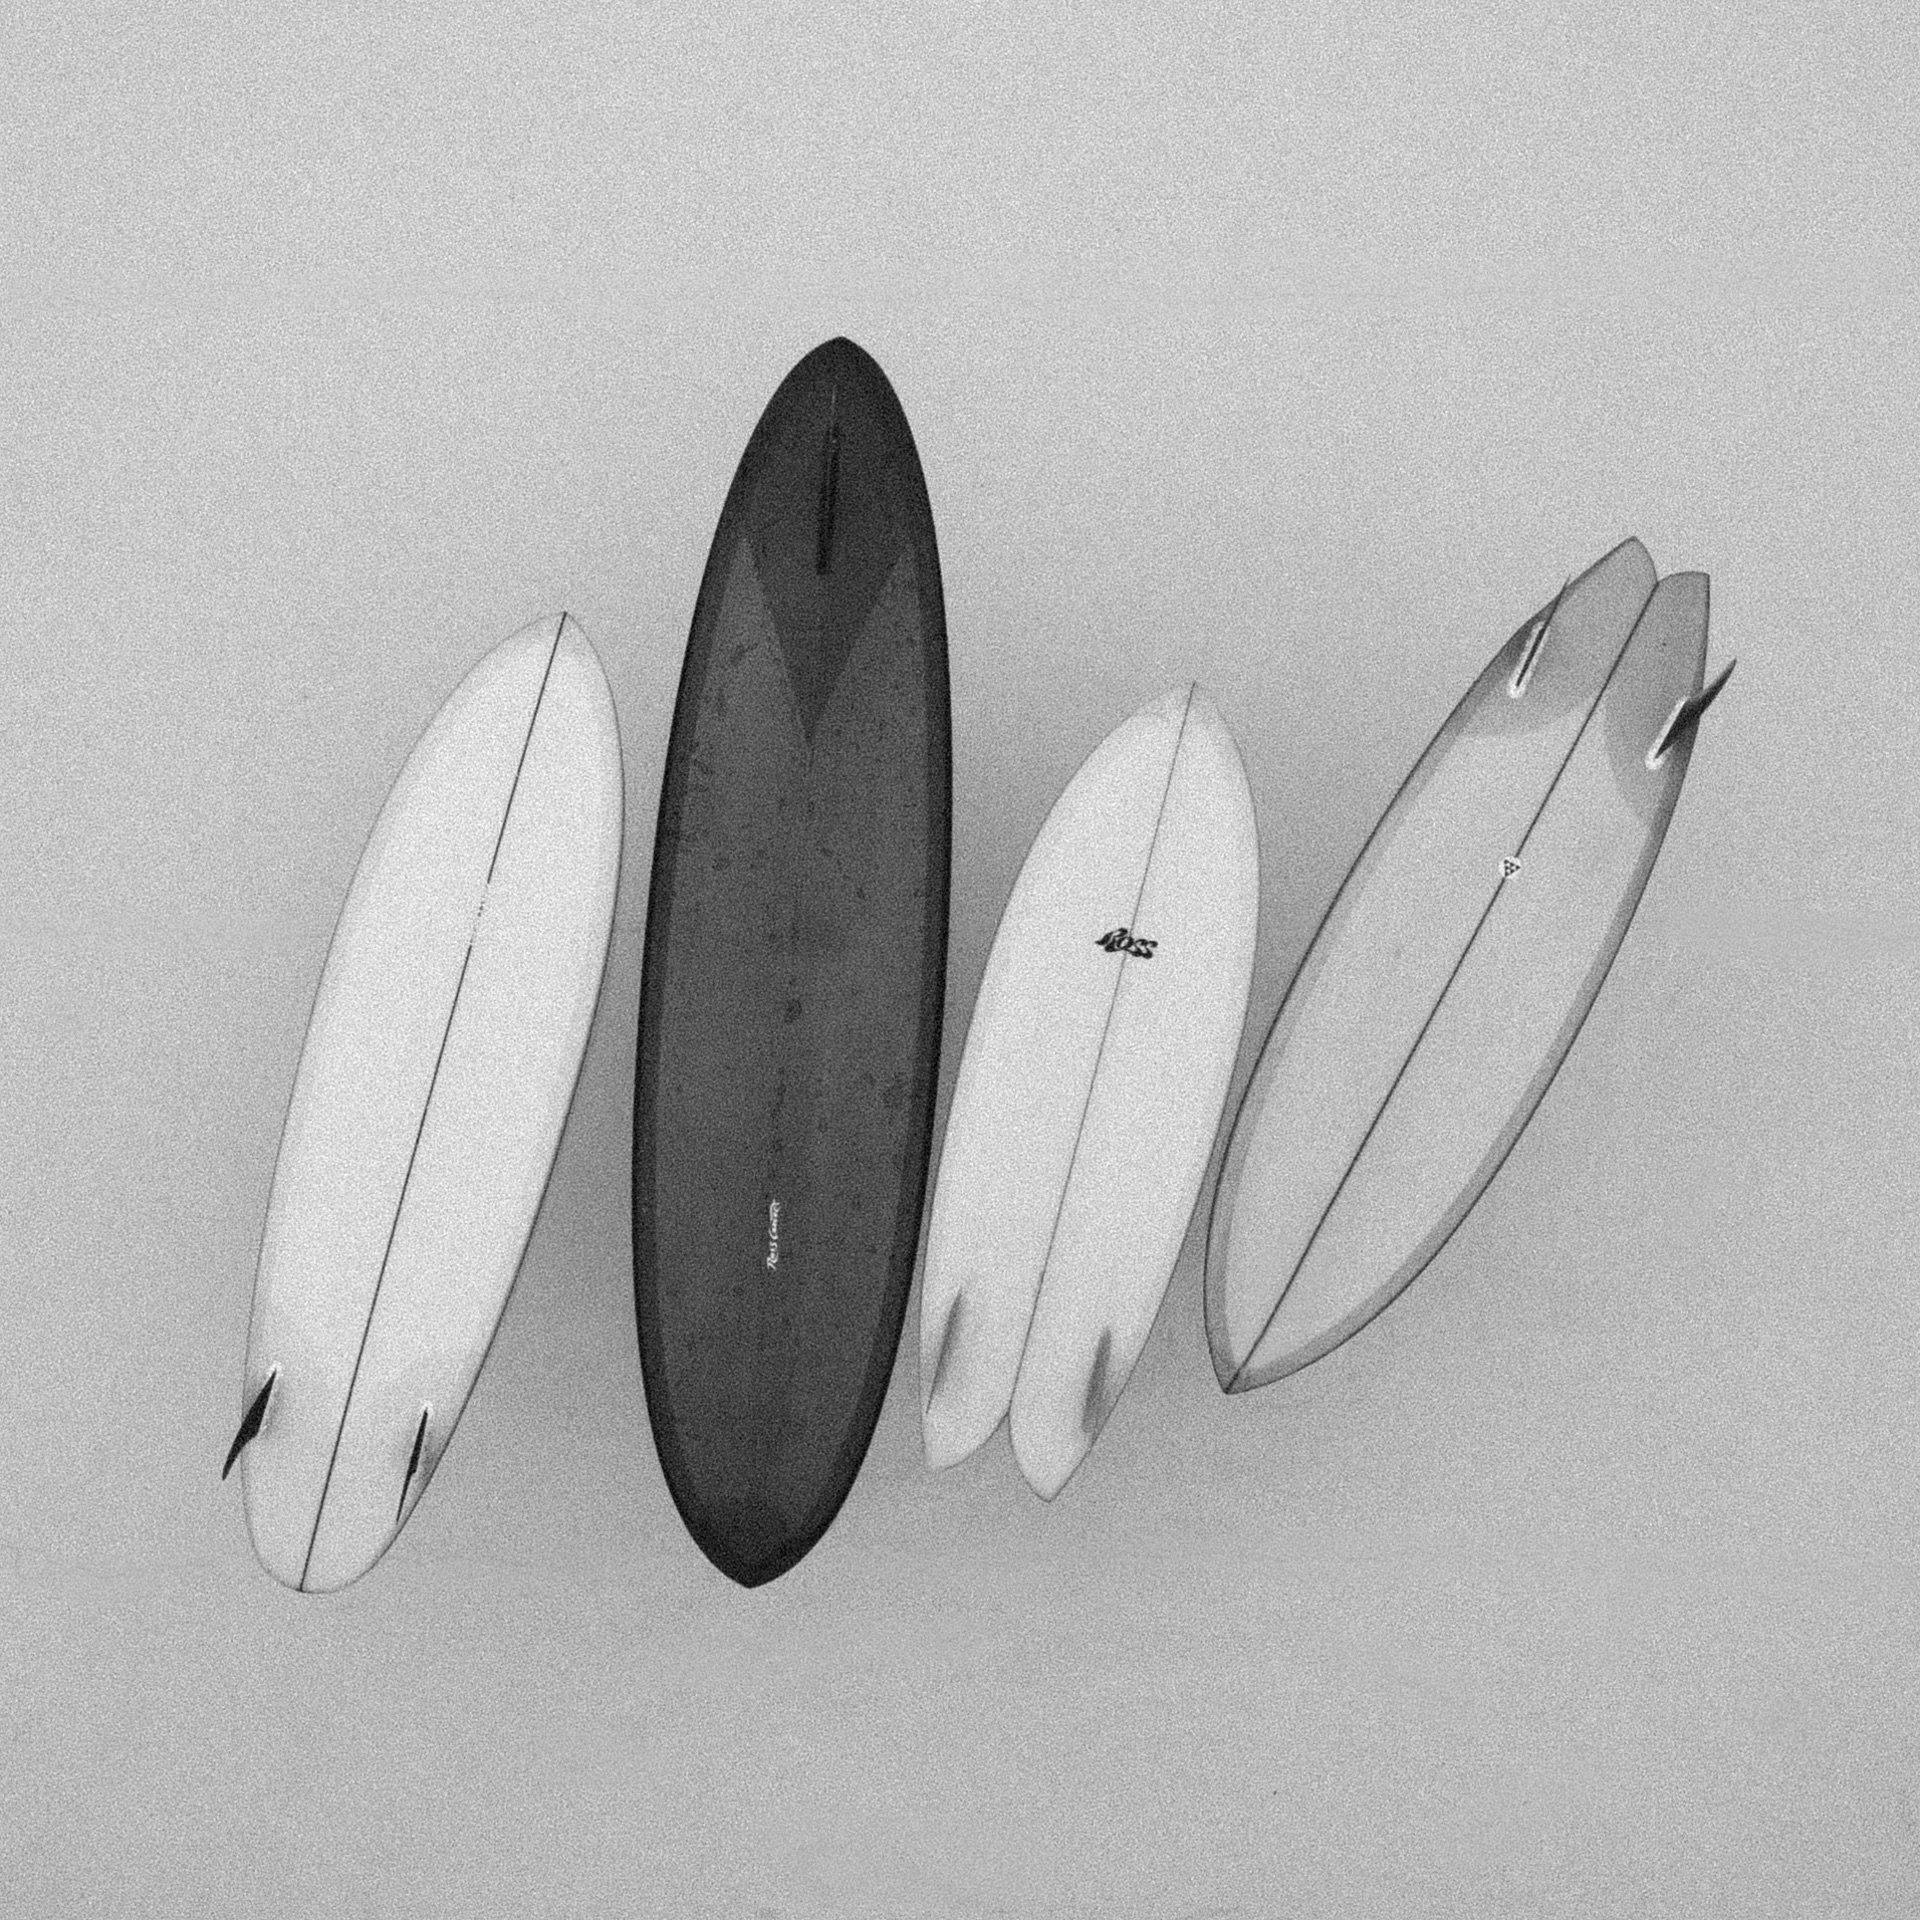 A quiver to cover pretty much anything the ocean throws at you. From left to right - Ocean Tracer Squash Tail, Good Karma, Tropical Keel, Surya.